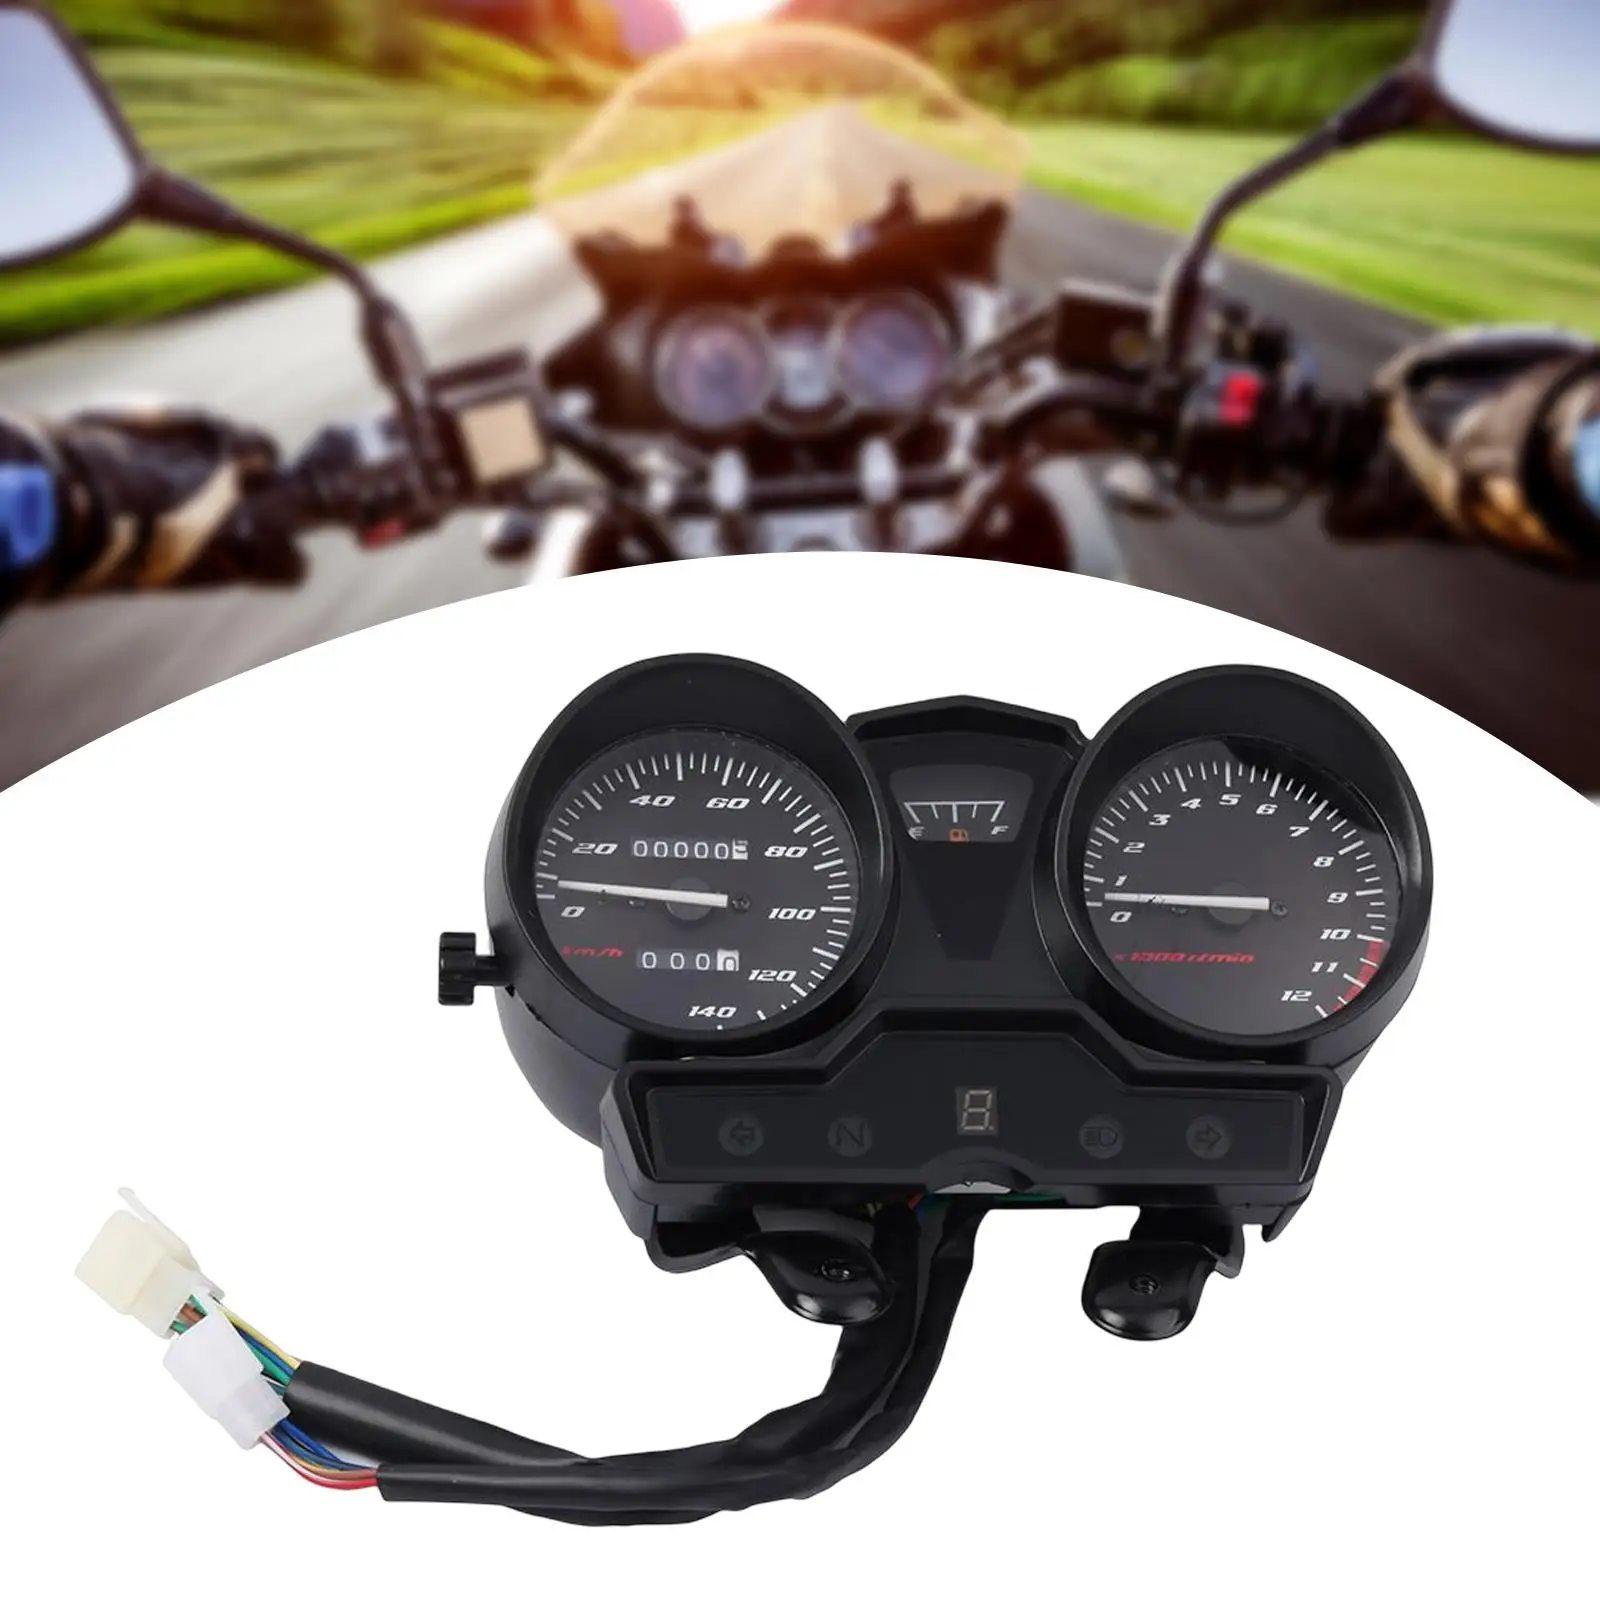 LED Digital Dashboard Motorcycle RPM Meter Meter Accessories Spare Parts